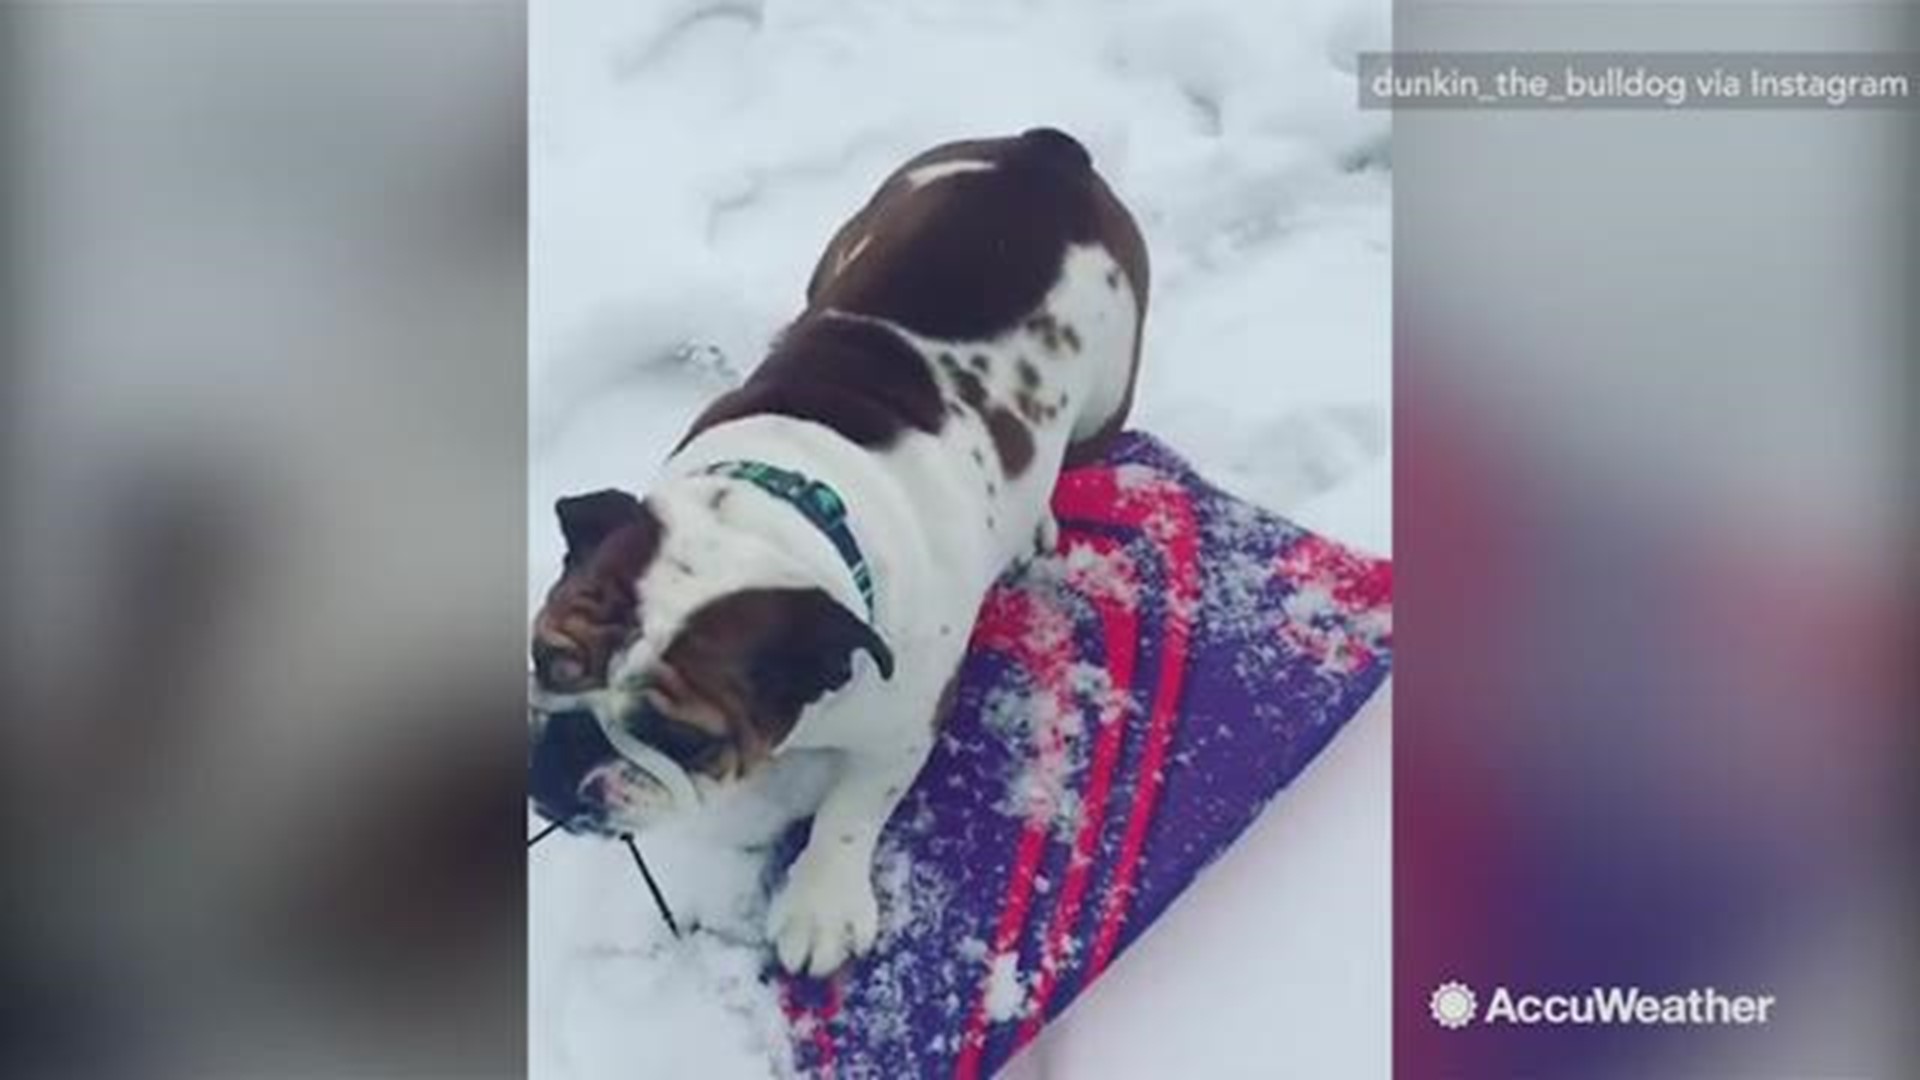 Dunkin, the bulldog, is enjoying all the snow they got from the snowstorm. He's seen here sledding in Cary, North Carolina on December 10.